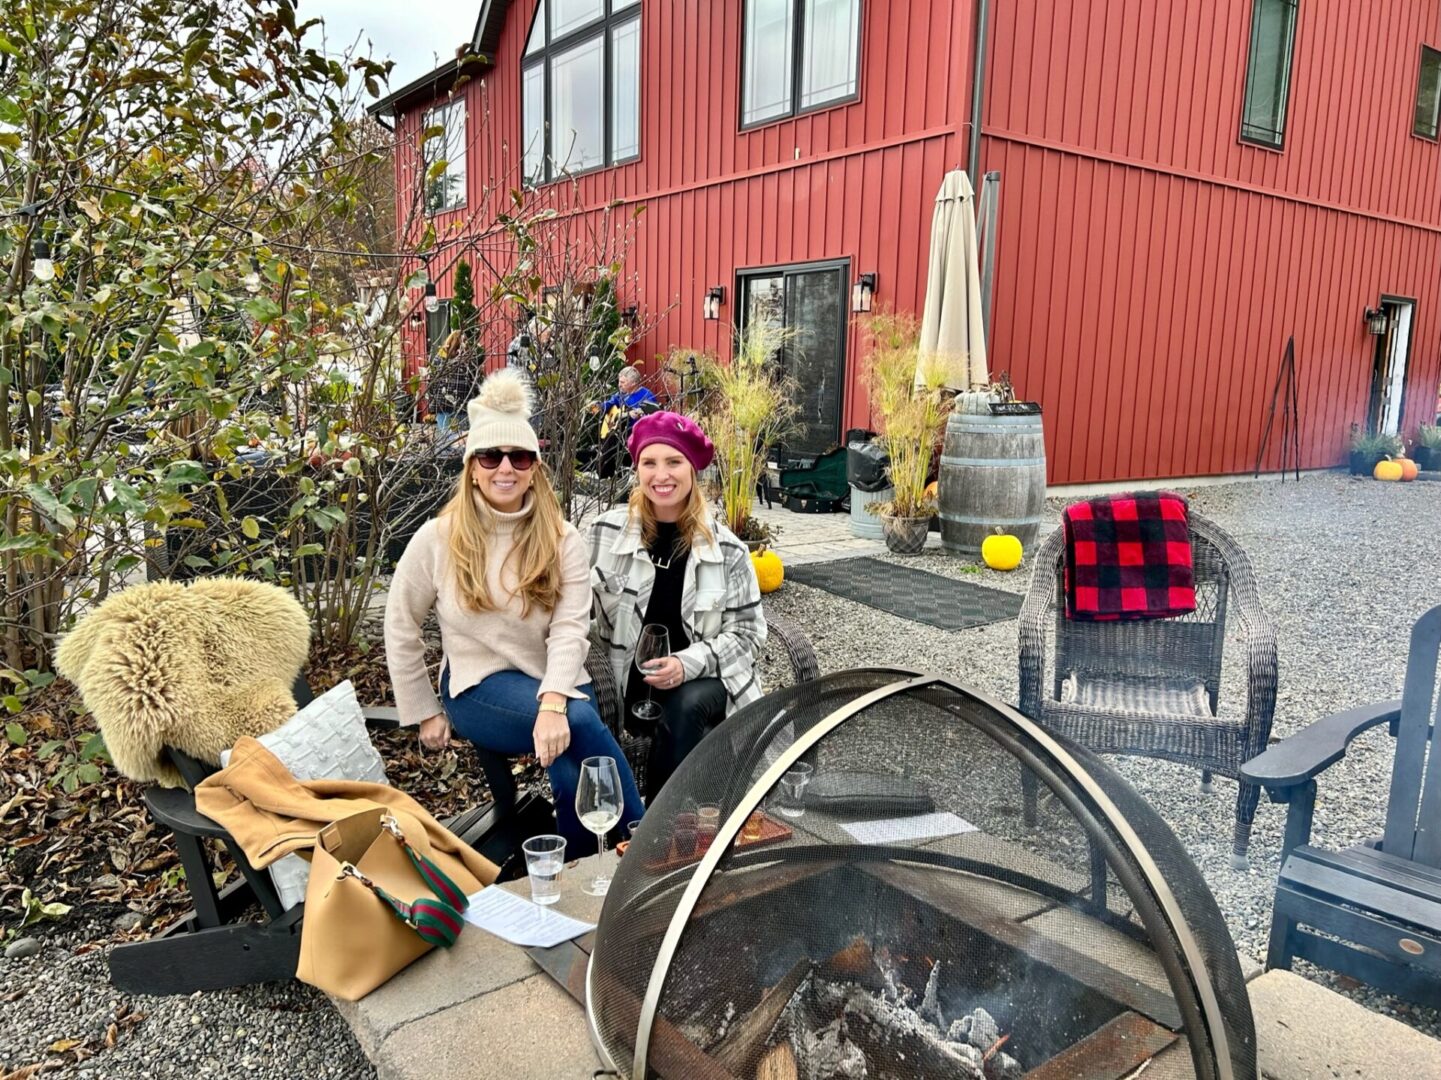 Two women sitting in front of a fire pit.